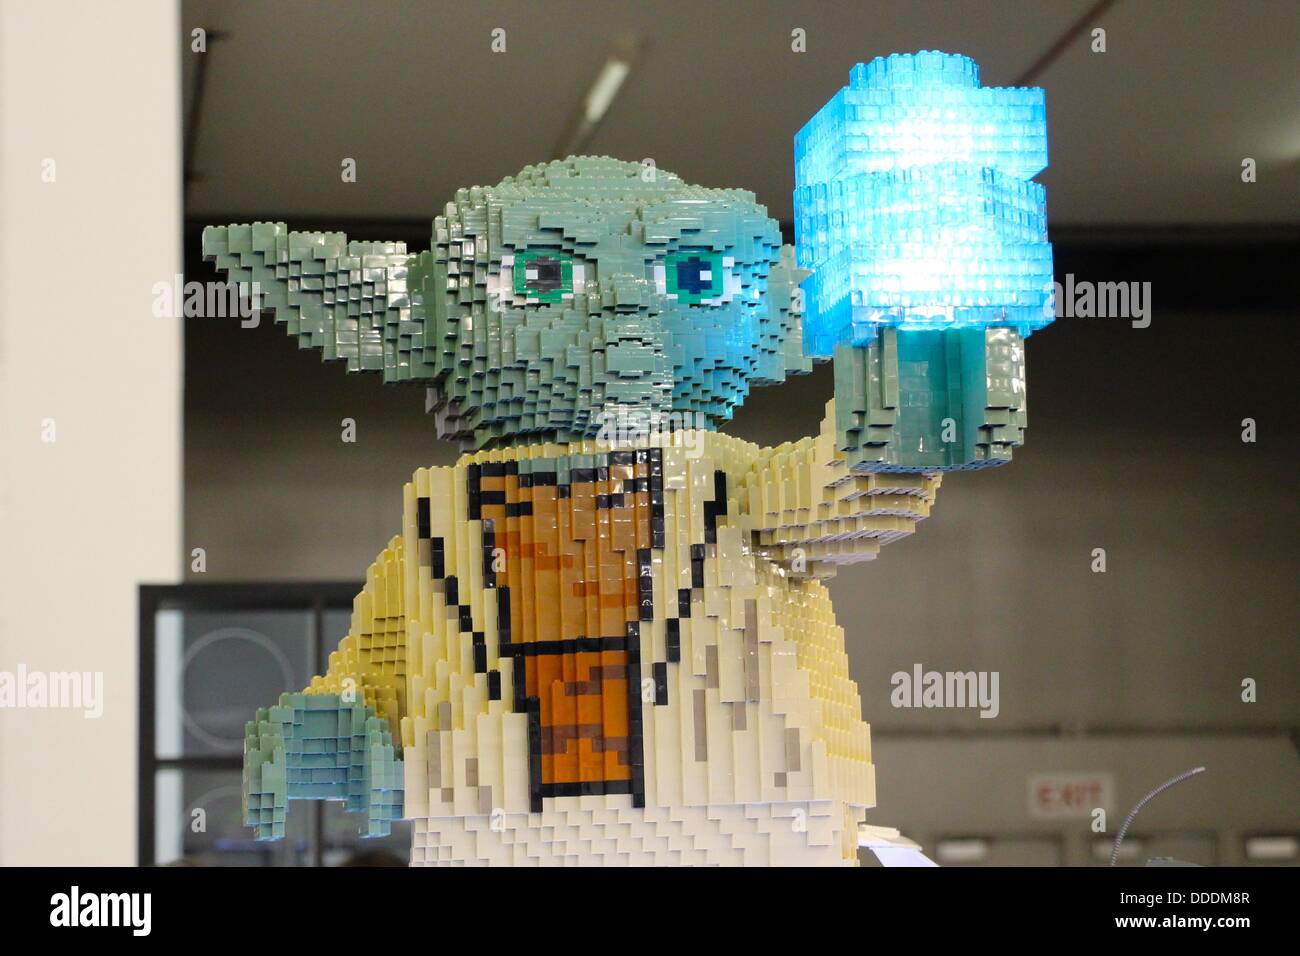 Yoda from Star Wars made out of LEGOs. Stock Photo